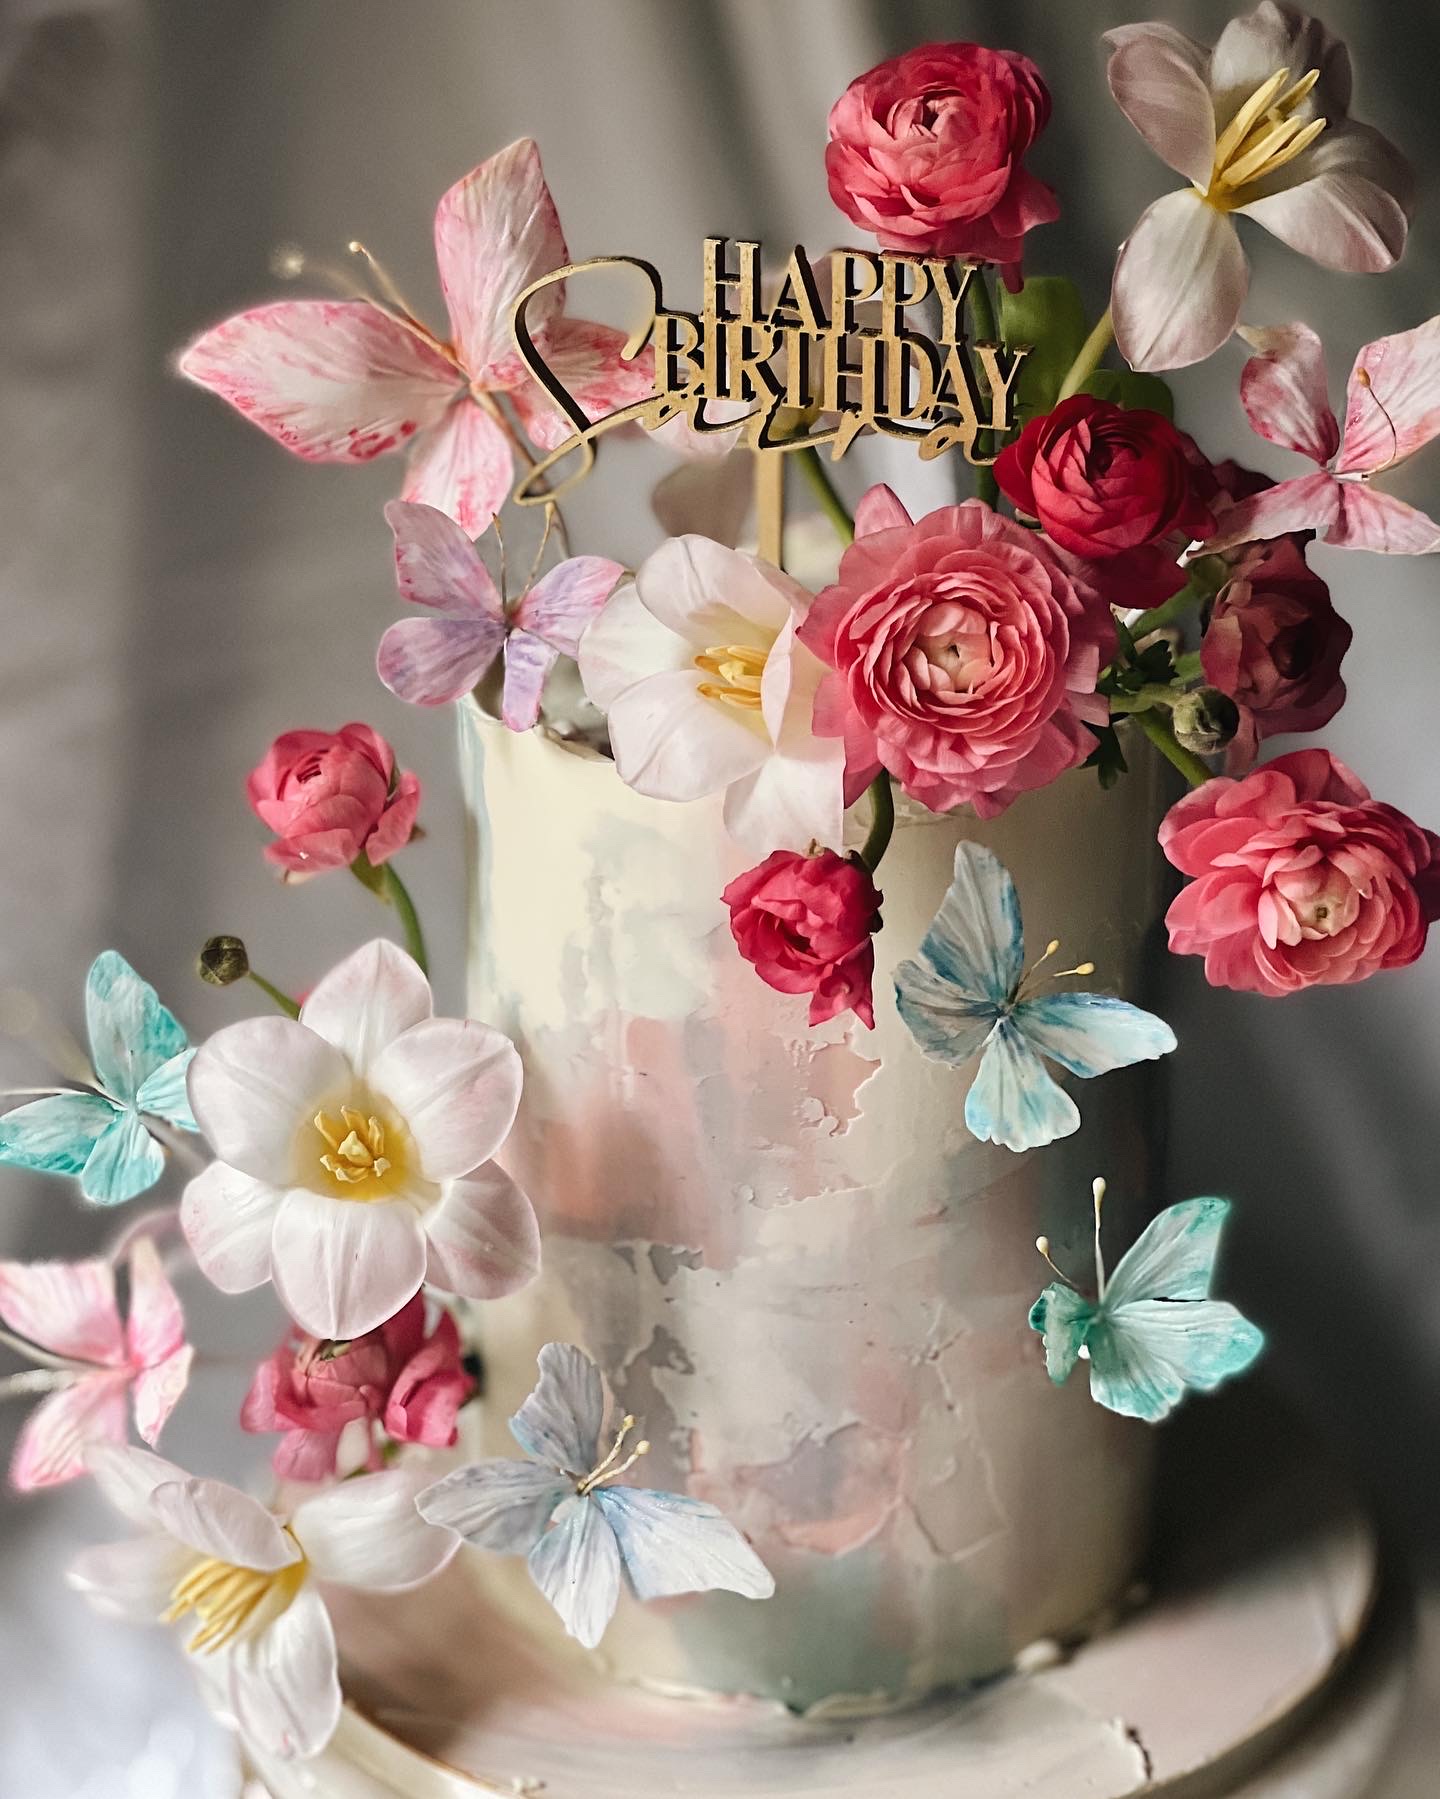 Birthday Cake With Roses in Slidell, LA | Weathers Flower Market